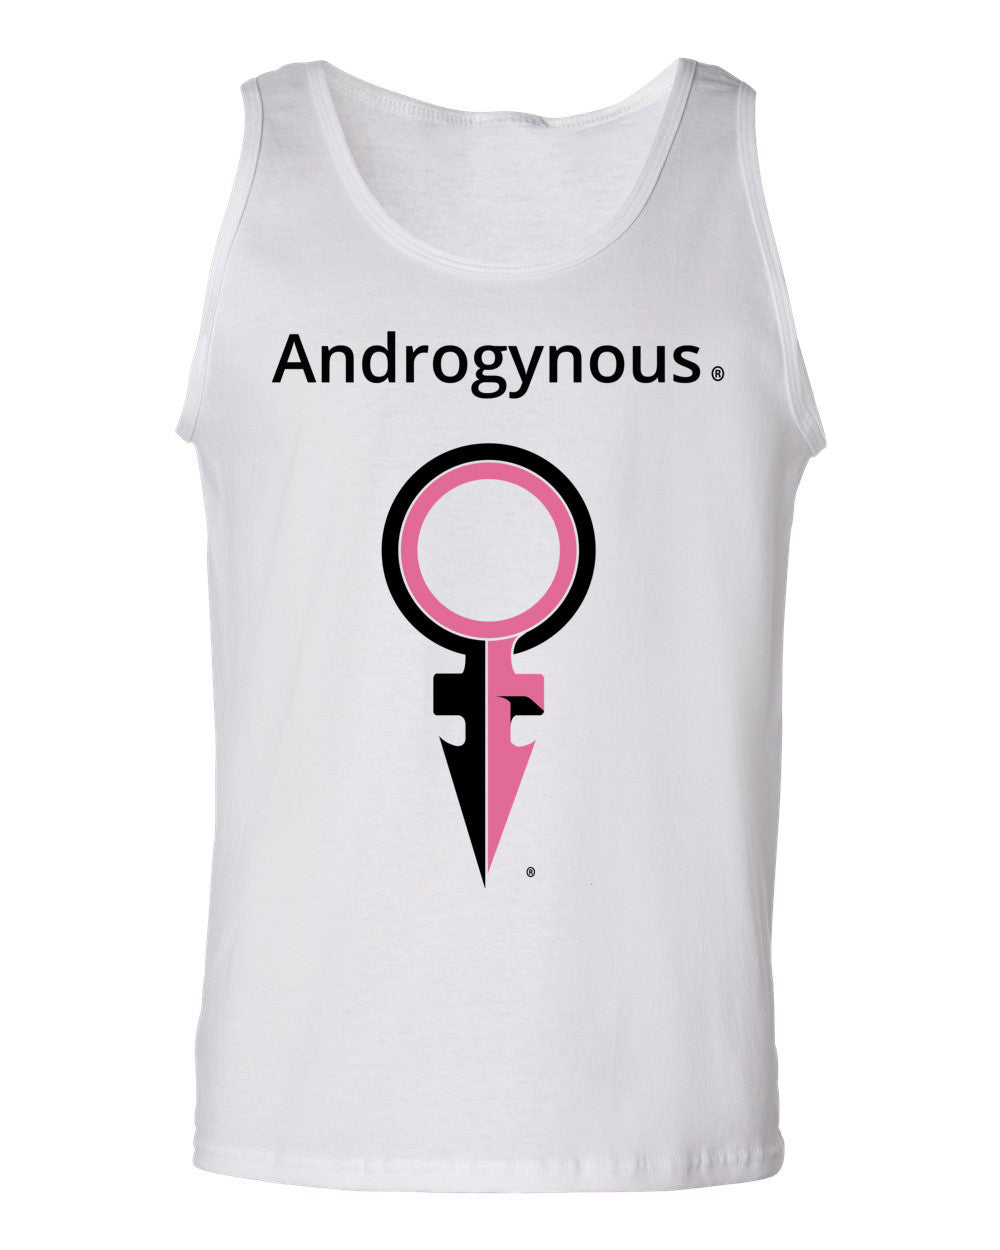 ANDROGYNOUS + SYMBOL PINK AND BLACK ON WHITE PRINTED COTTON-T-SHIRT